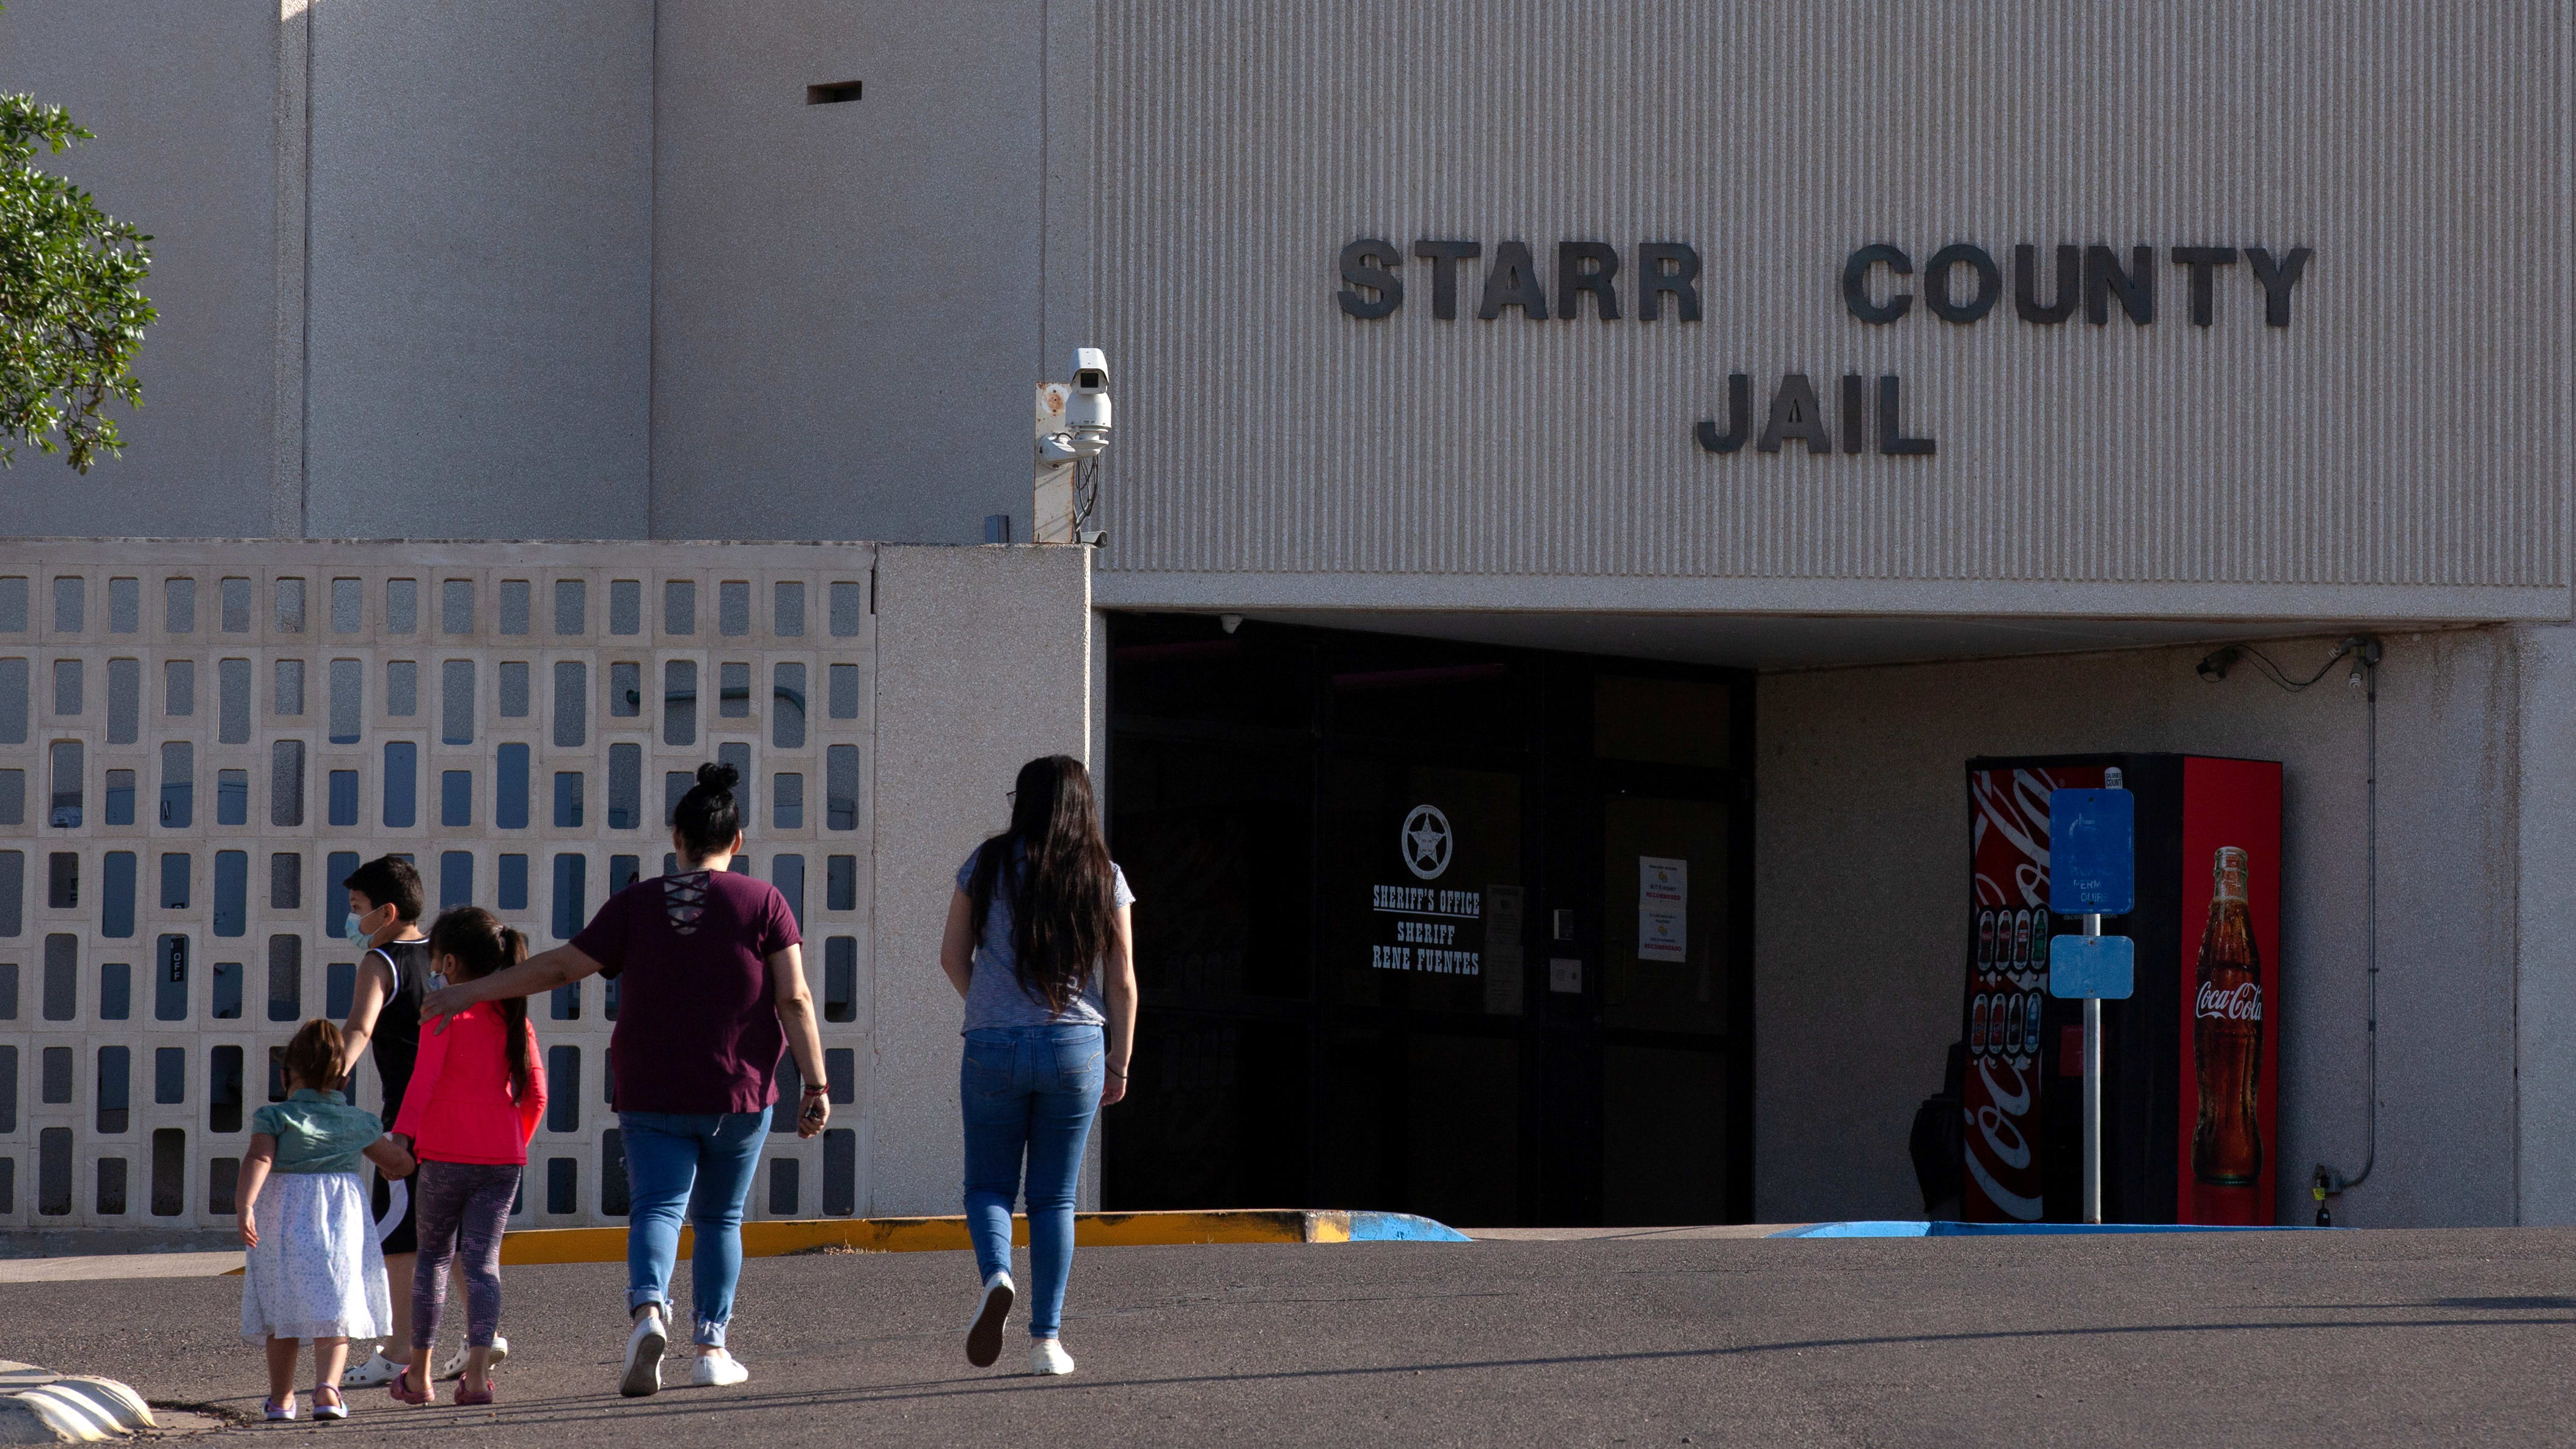 The Starr County Jail in Rio Grande City, Texas.